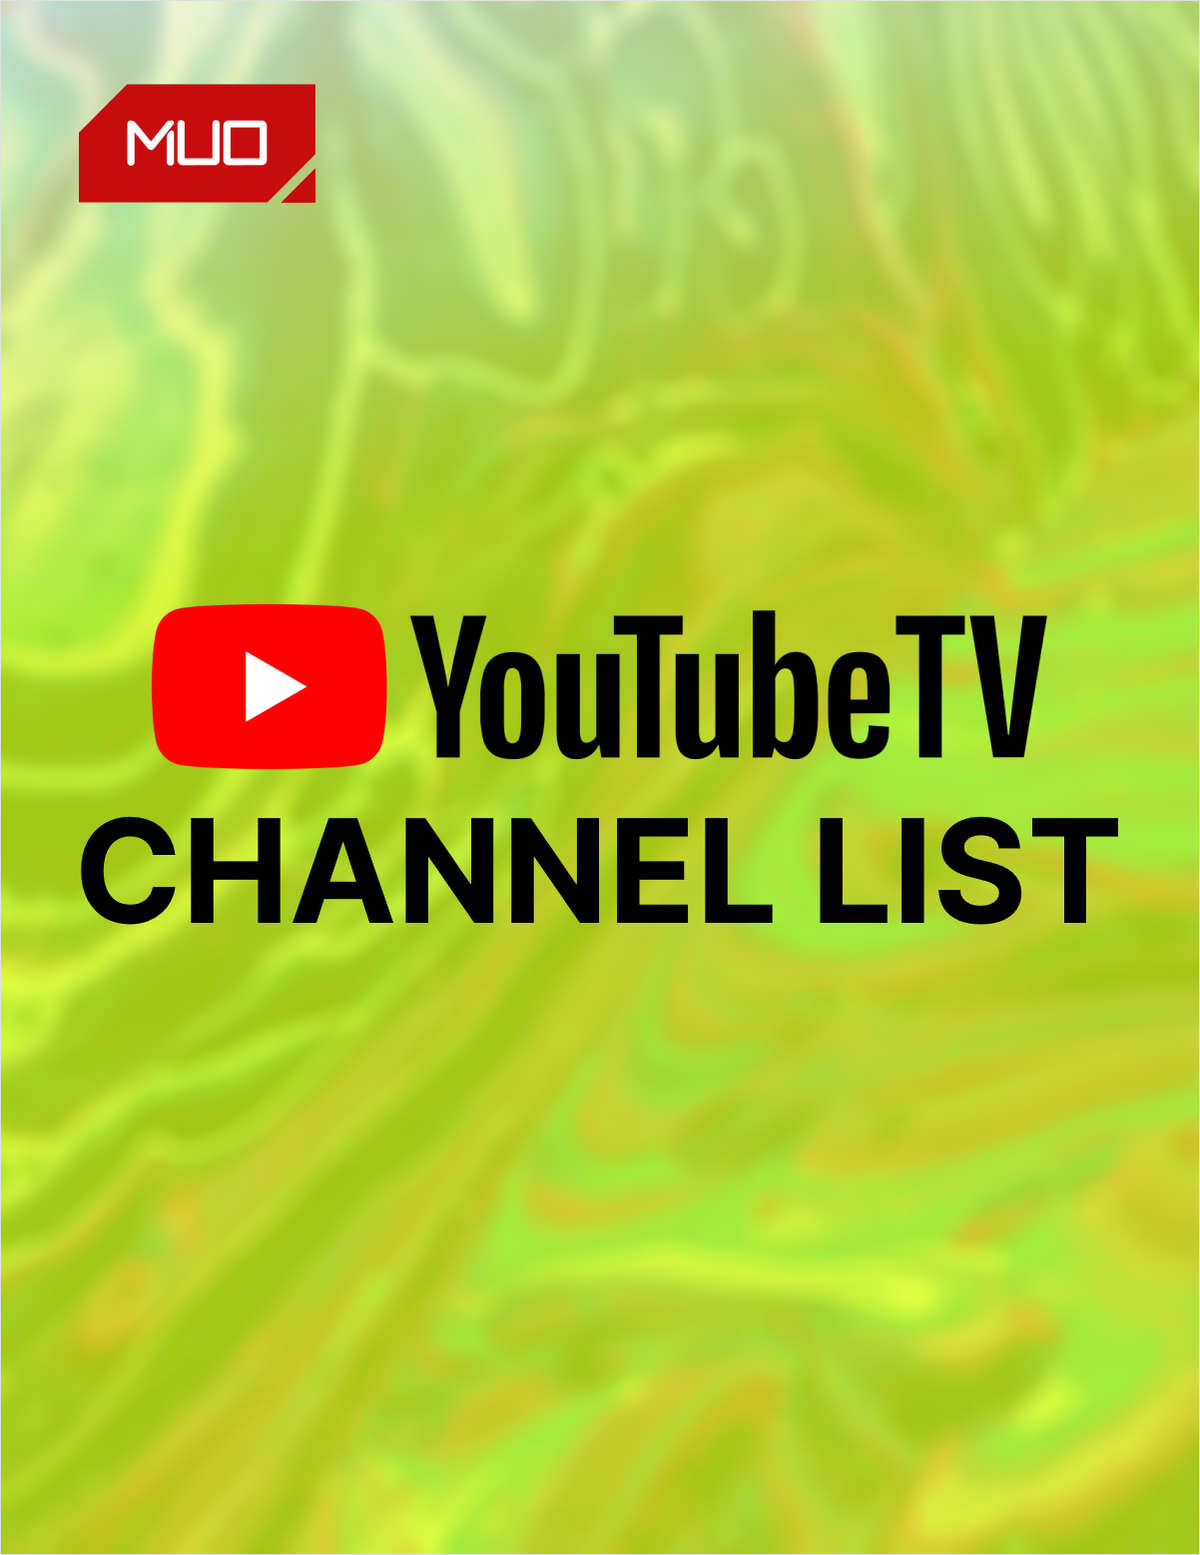 YouTube TV Channel List and Pricing Guide Free Cheat Sheet